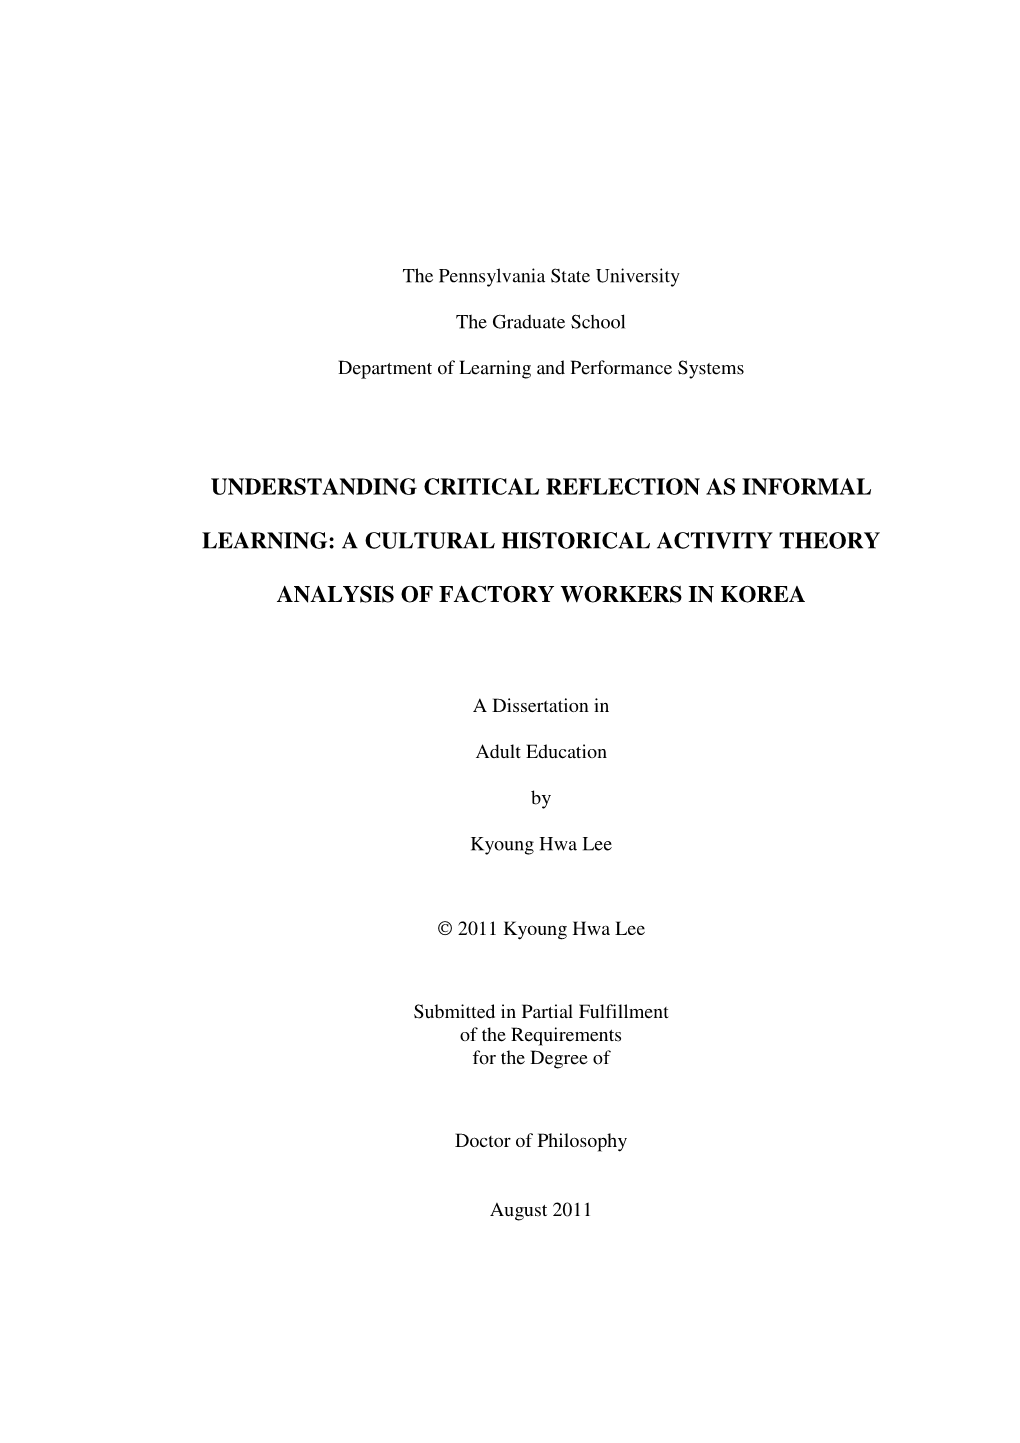 Understanding Critical Reflection As Informal Learning: a Cultural Historical Activity Theory Analysis of Factory Workers in Korea